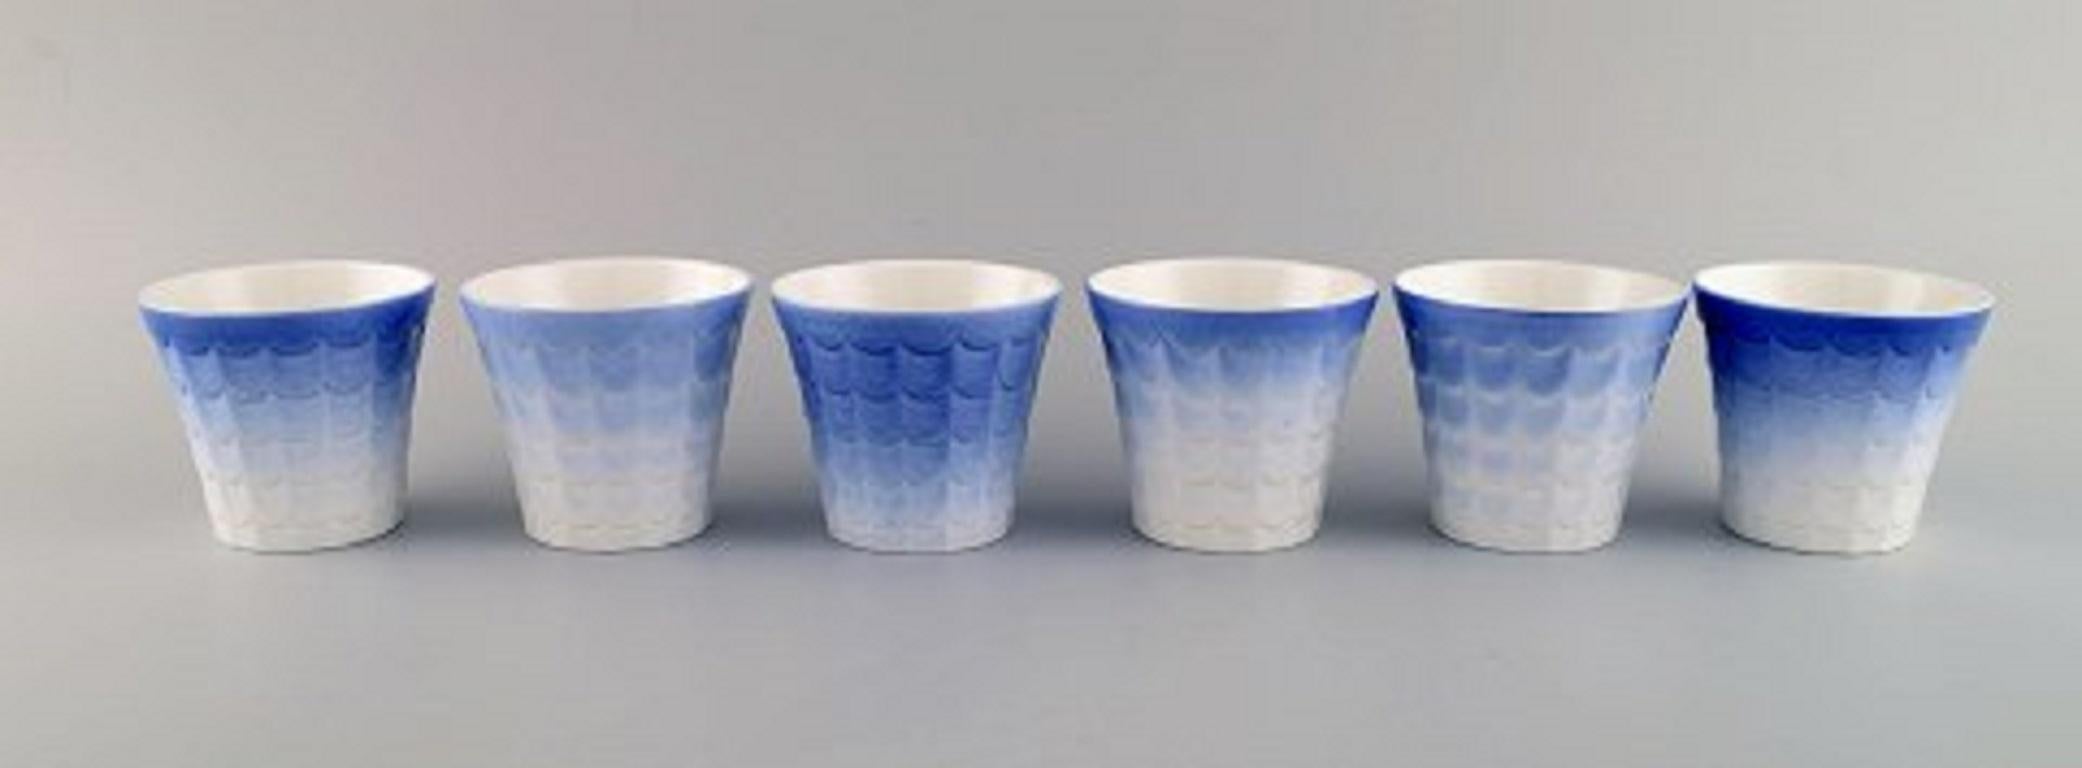 Wilhelm Kåge for Gustavsberg. Six flower pot covers in porcelain. Swedish design, 1960s.
Measures: 8.5 x 7.5 cm.
In excellent condition.
Stamped.